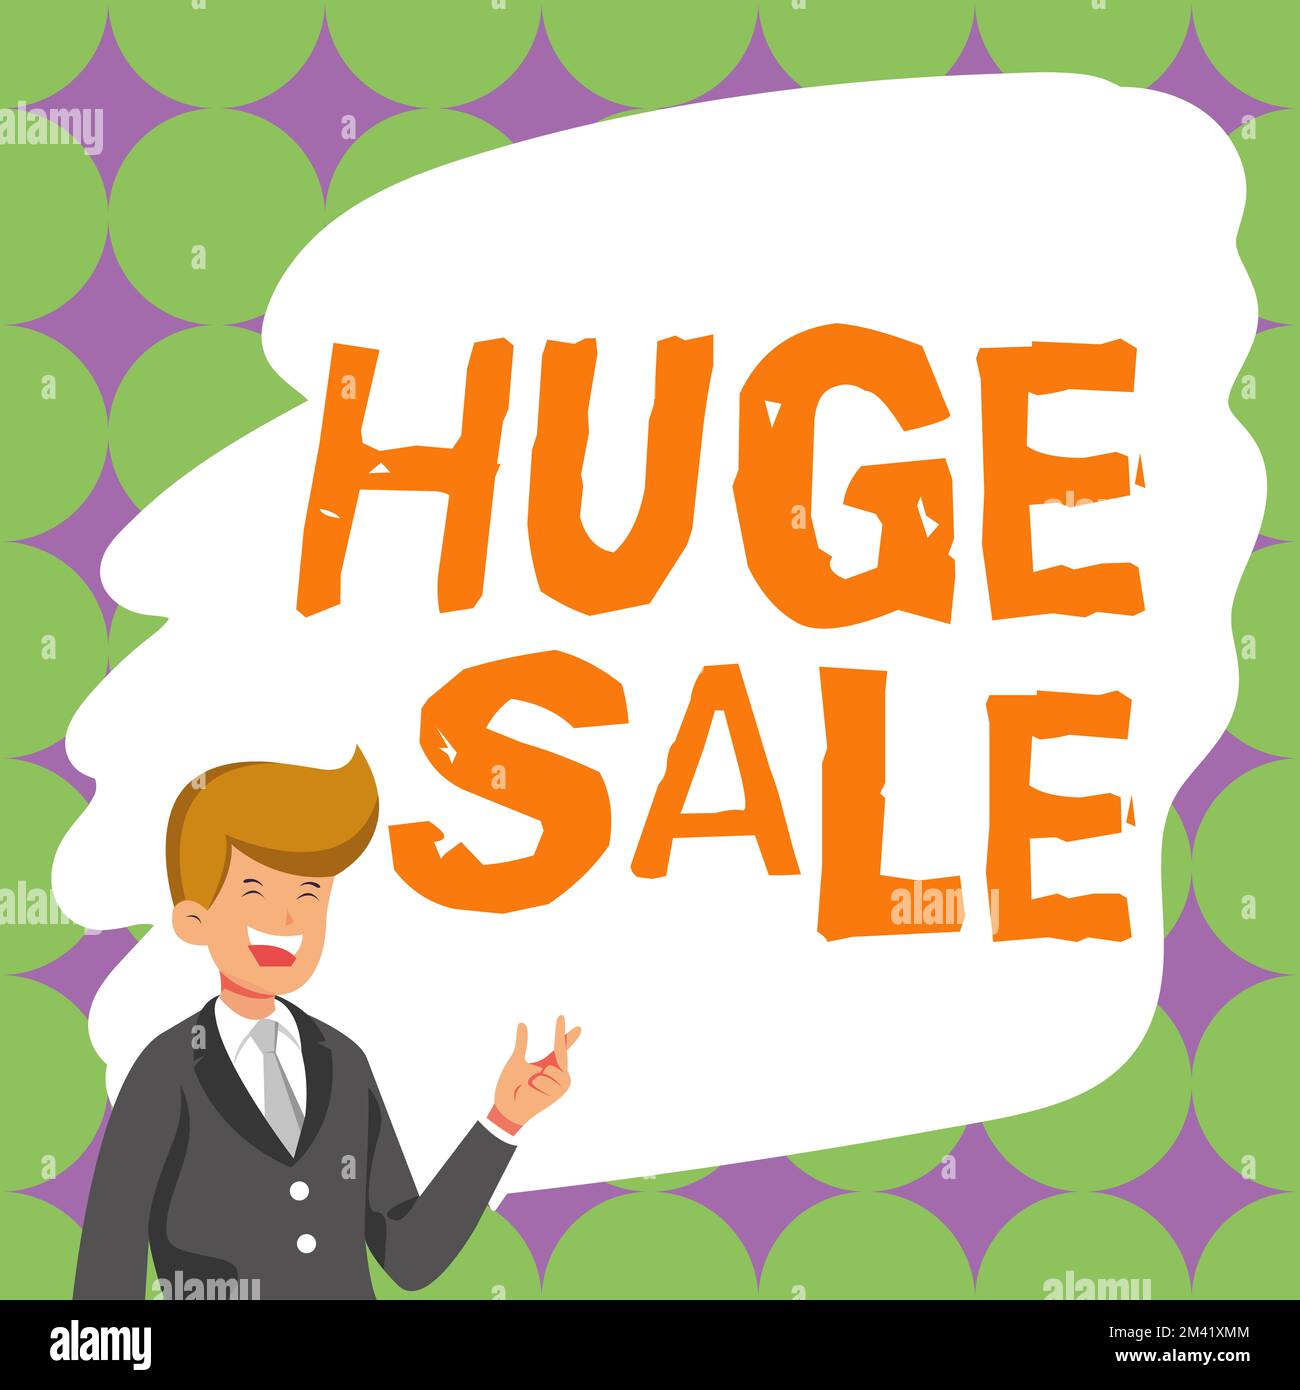 Clearance Sale Meaning Discounts Closeout And Promotional Stock Photo -  Alamy